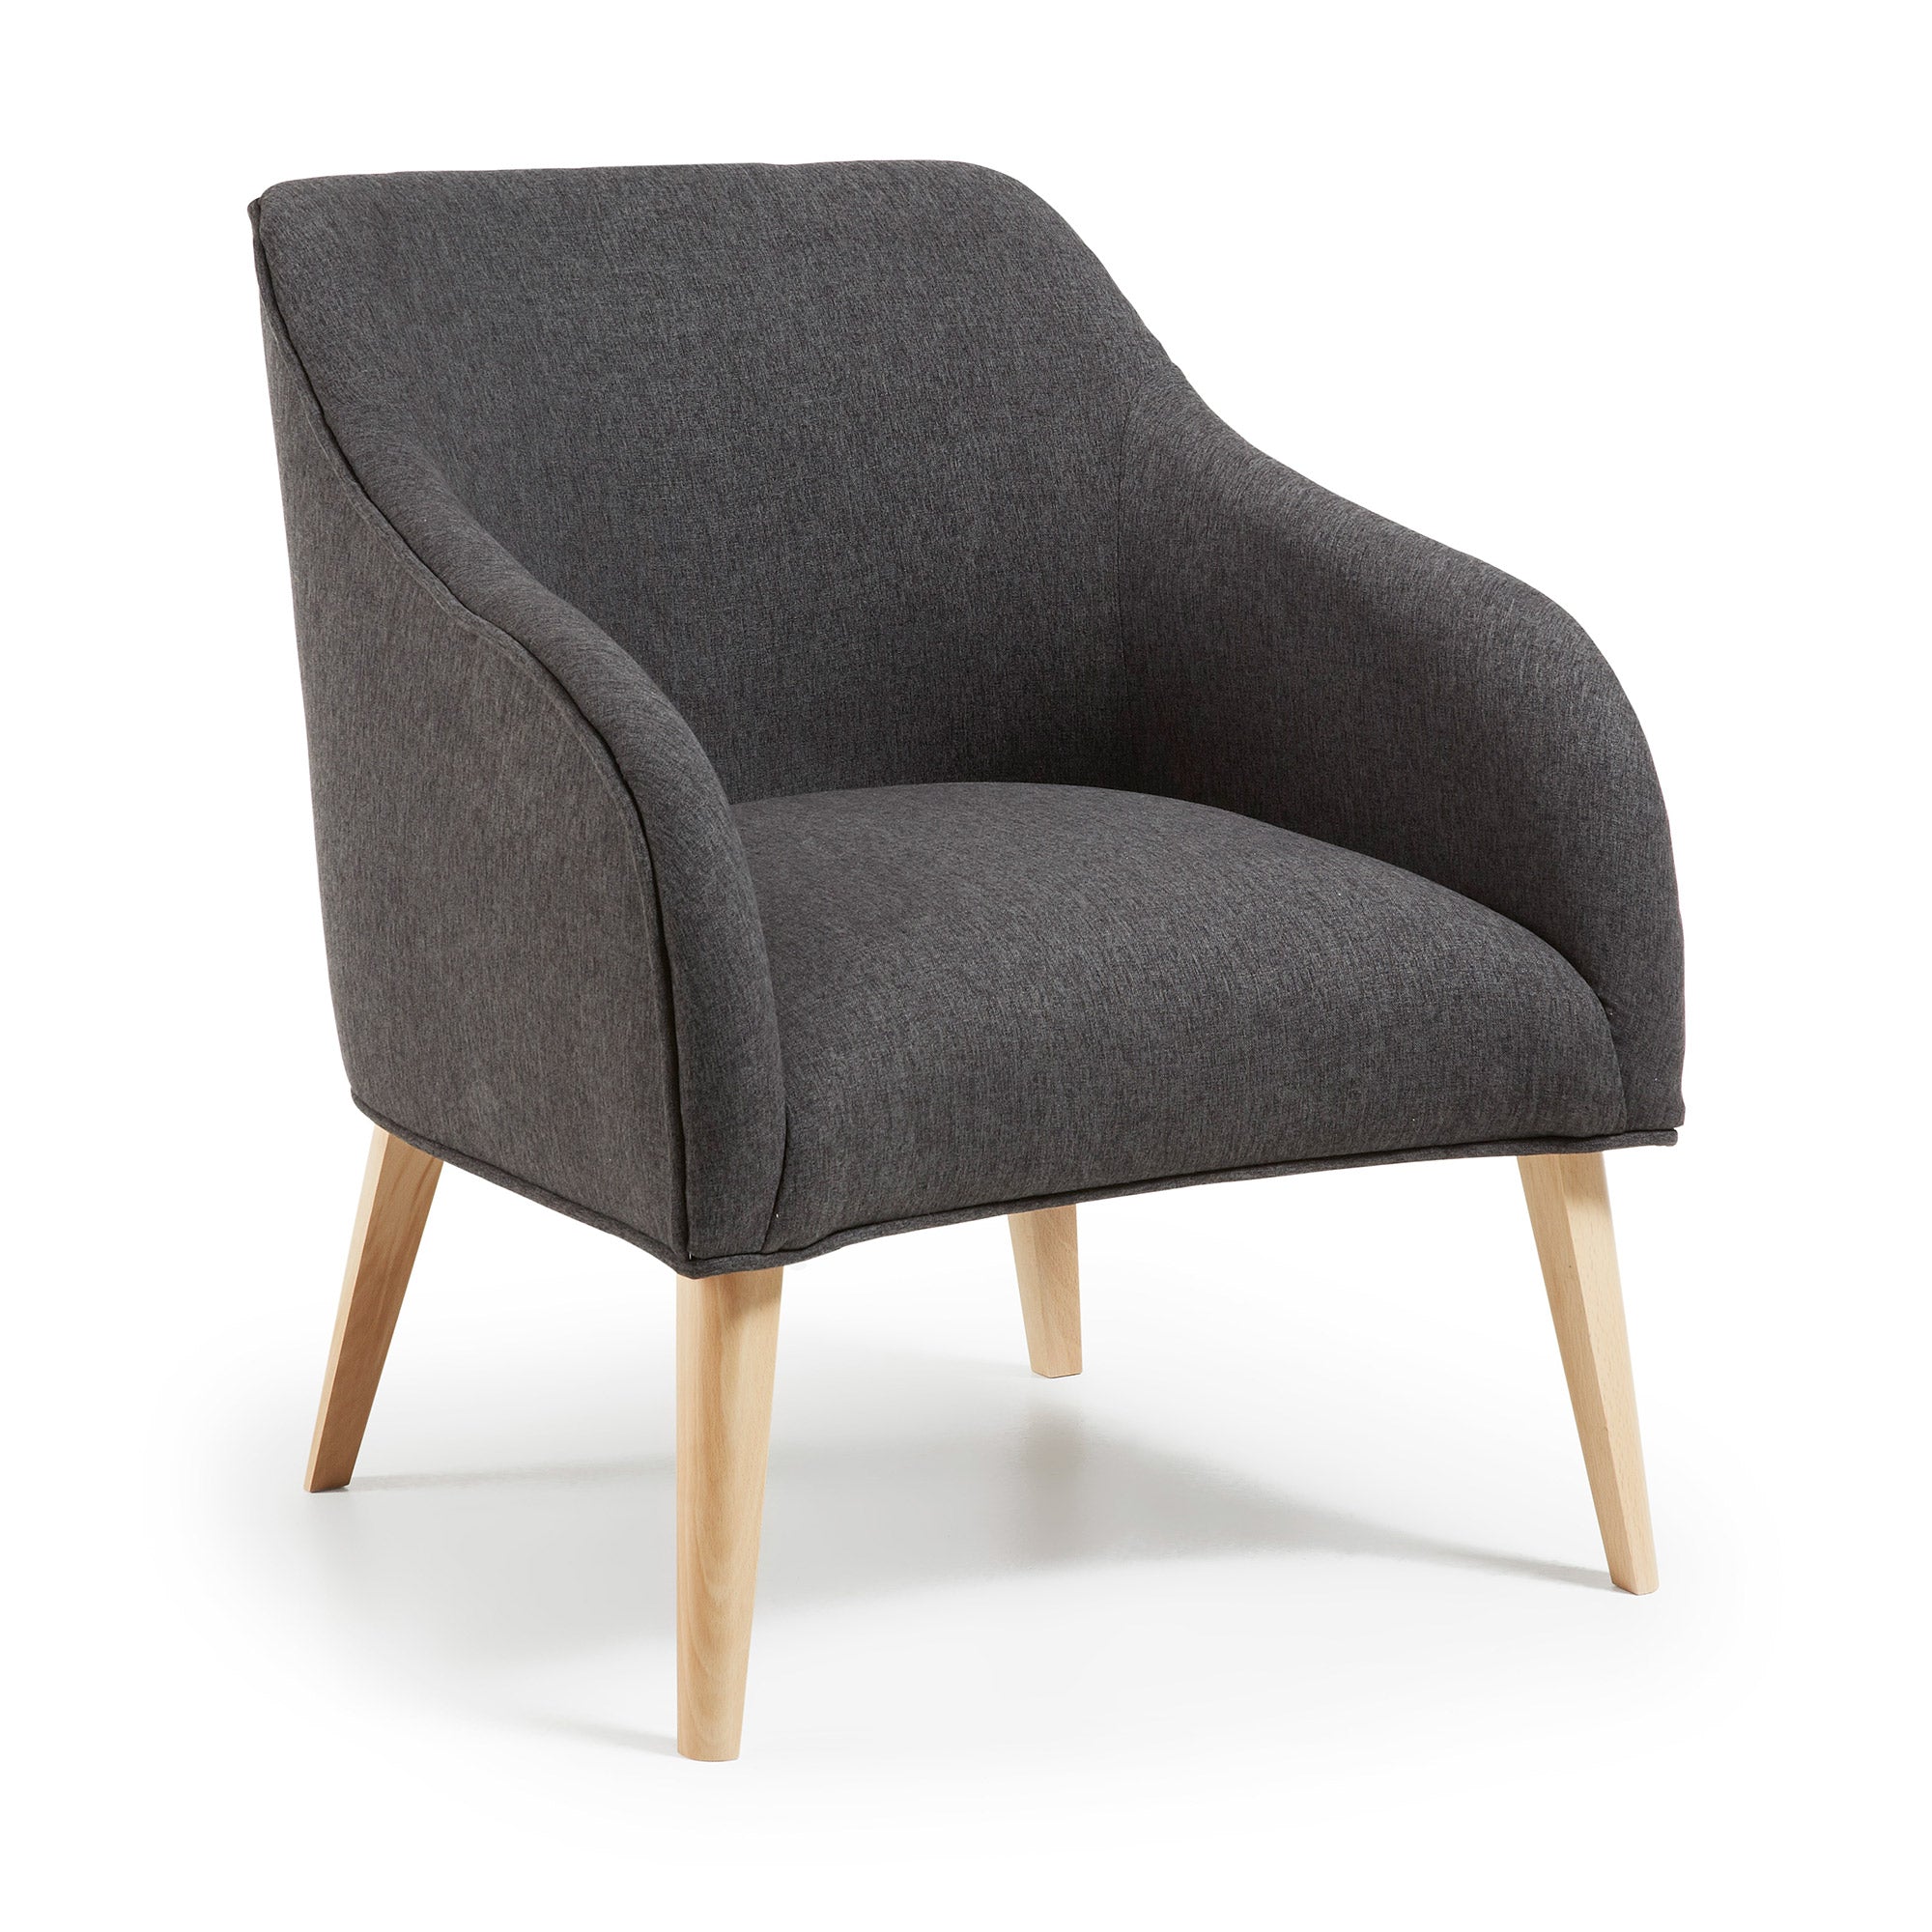 Bobly armchair in black with wood legs in a natural finish